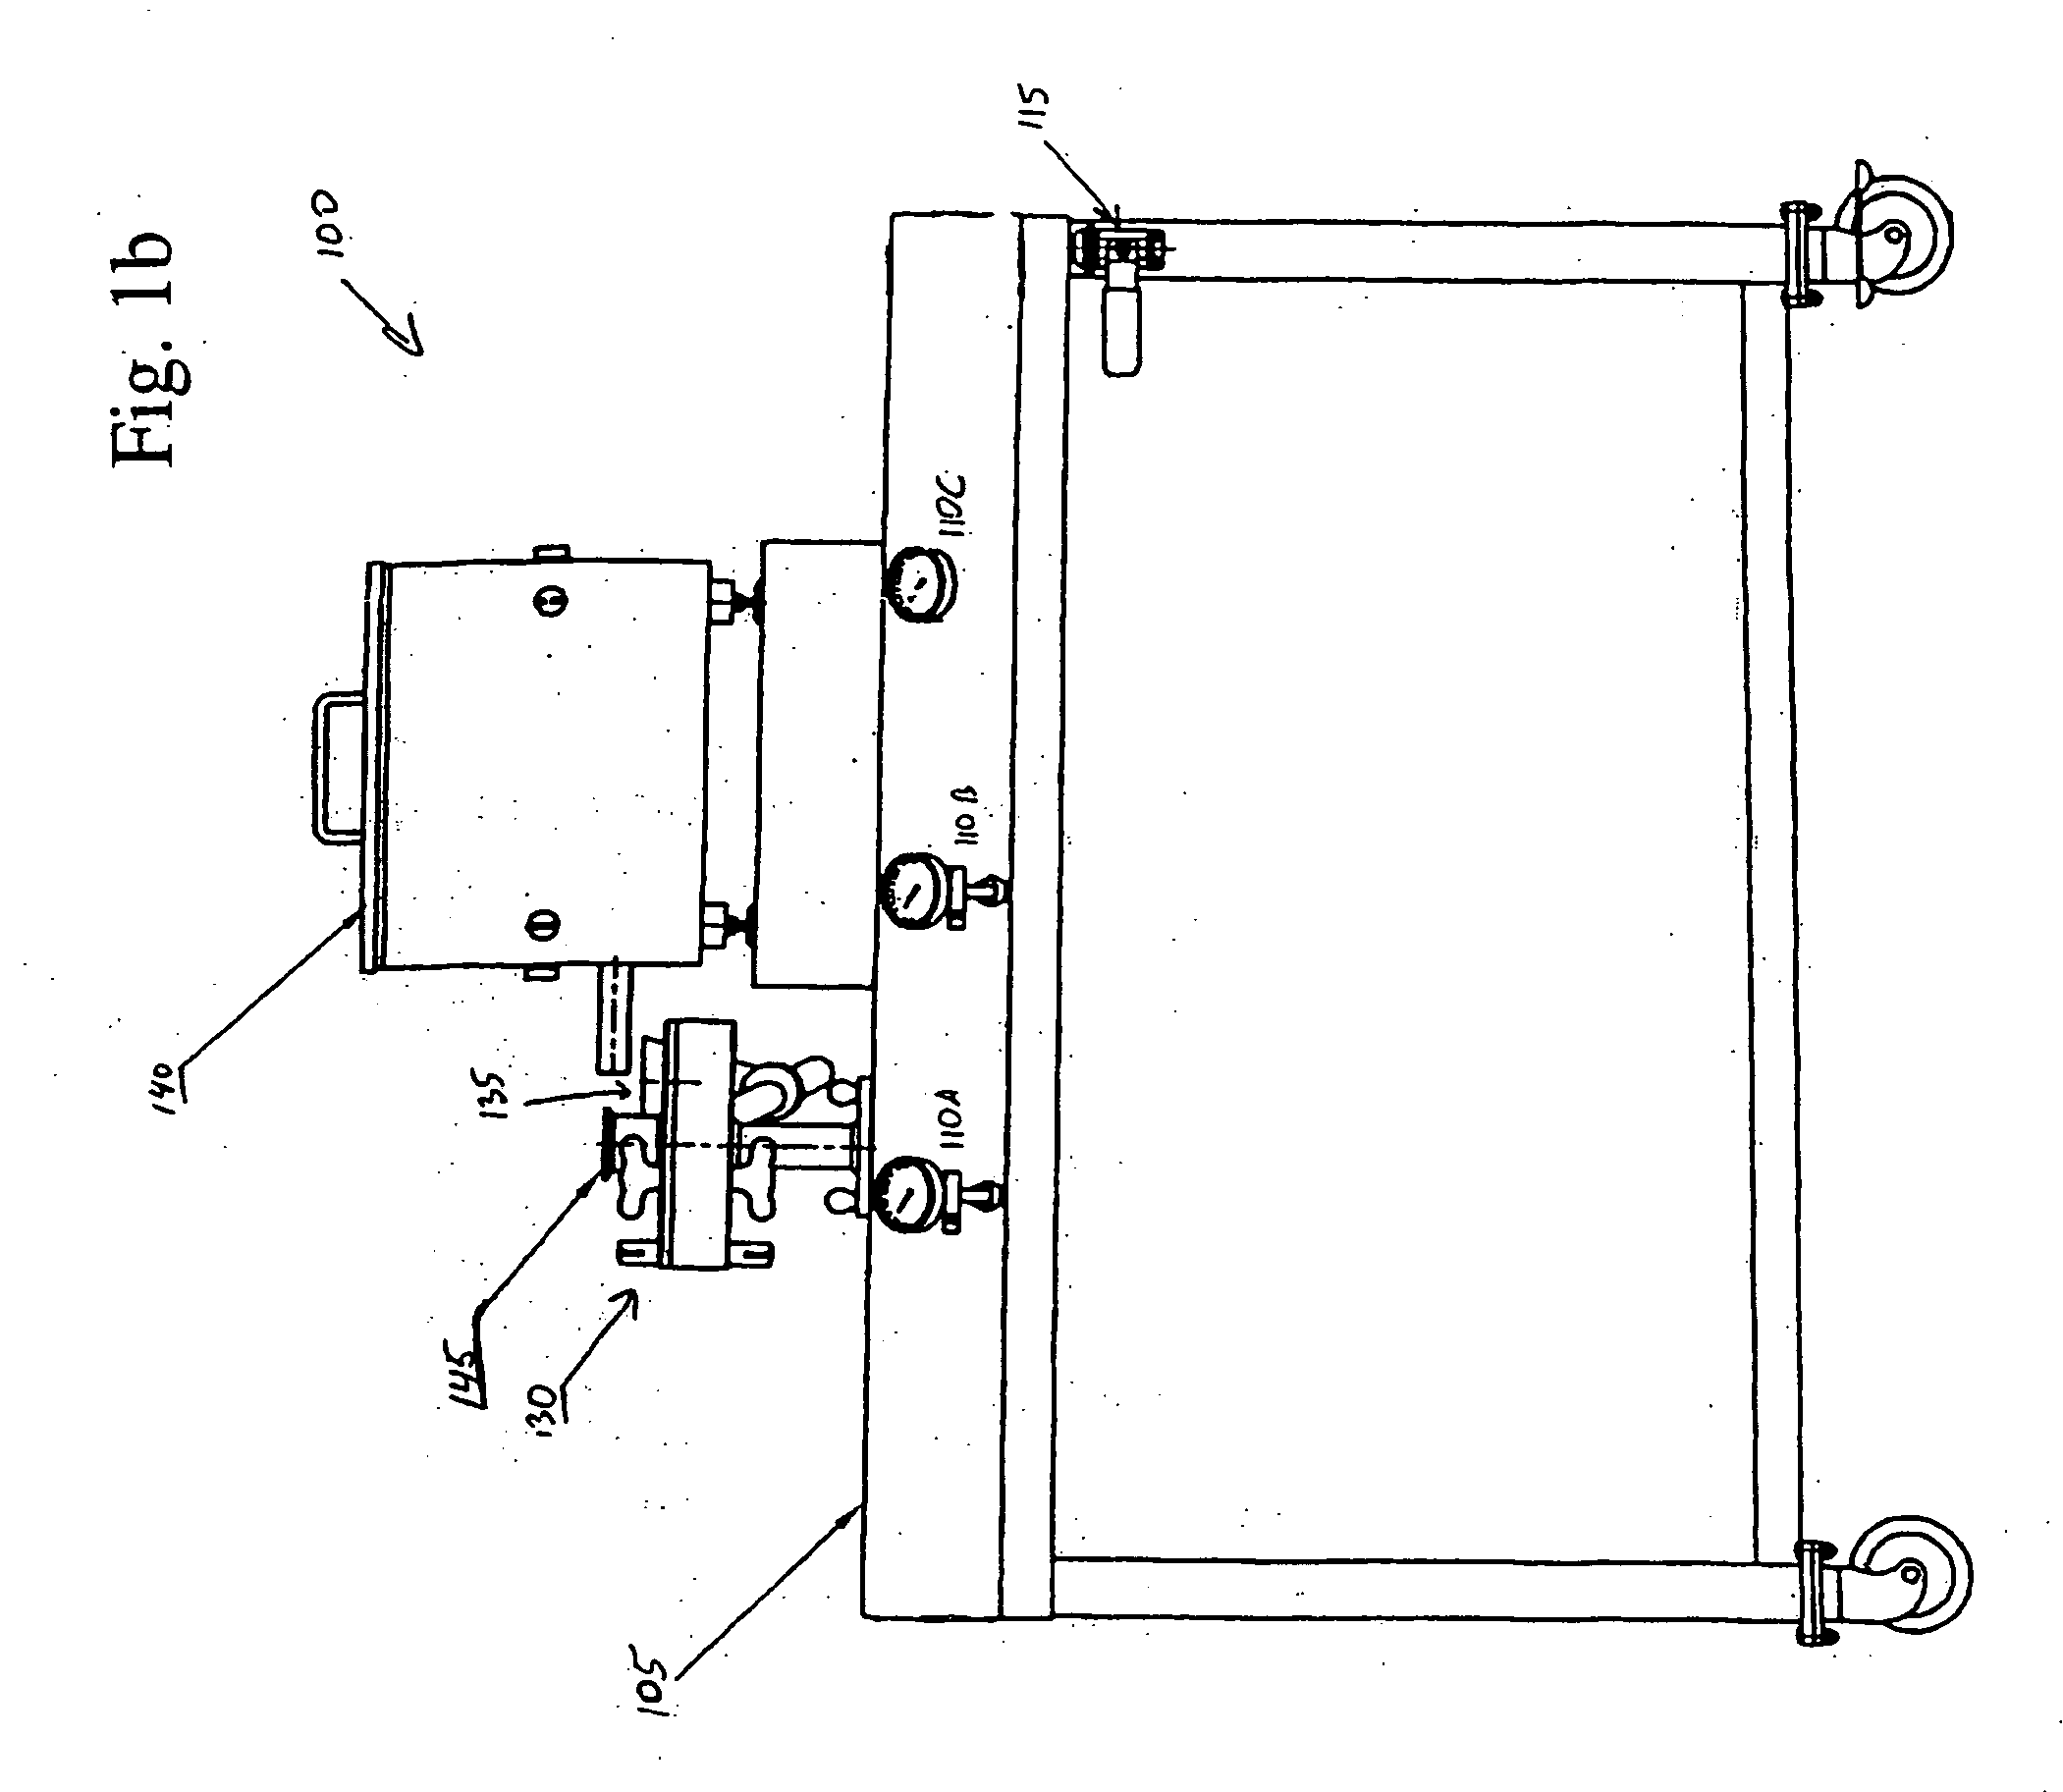 Dry-particle based capacitor and methods of making same